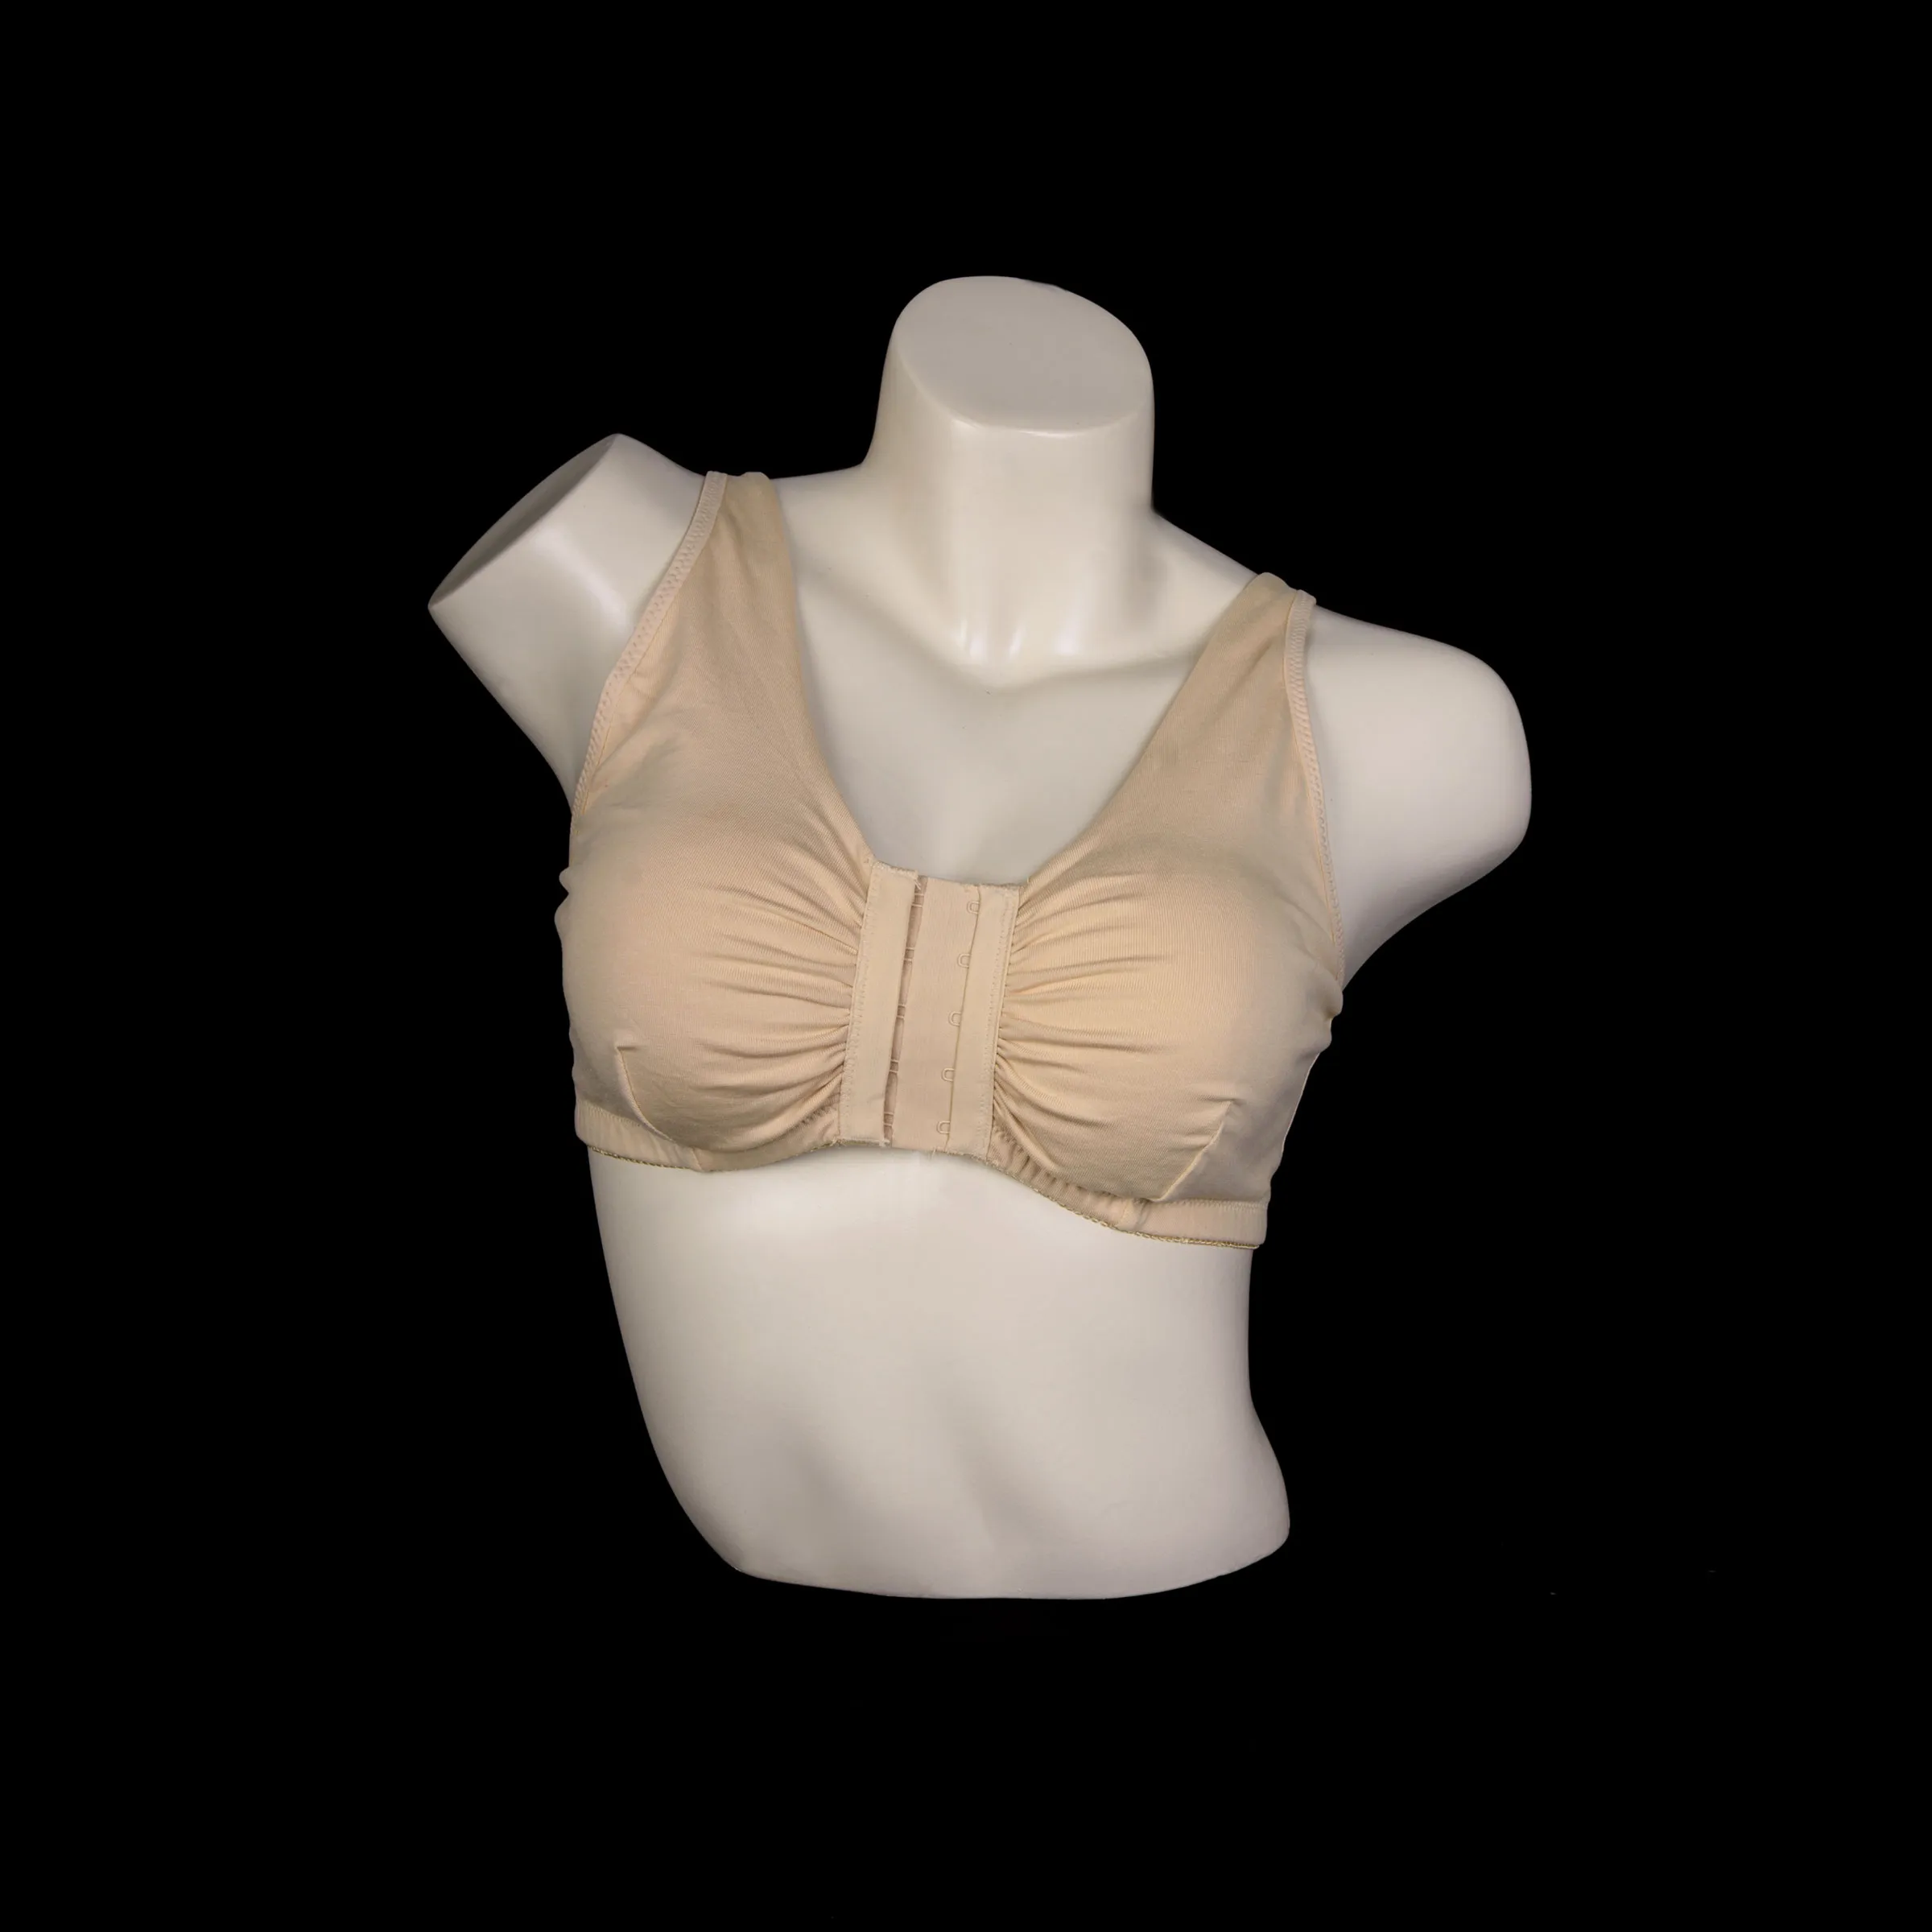 Buy IFG Vision Bra, Skin Online at Special Price in Pakistan